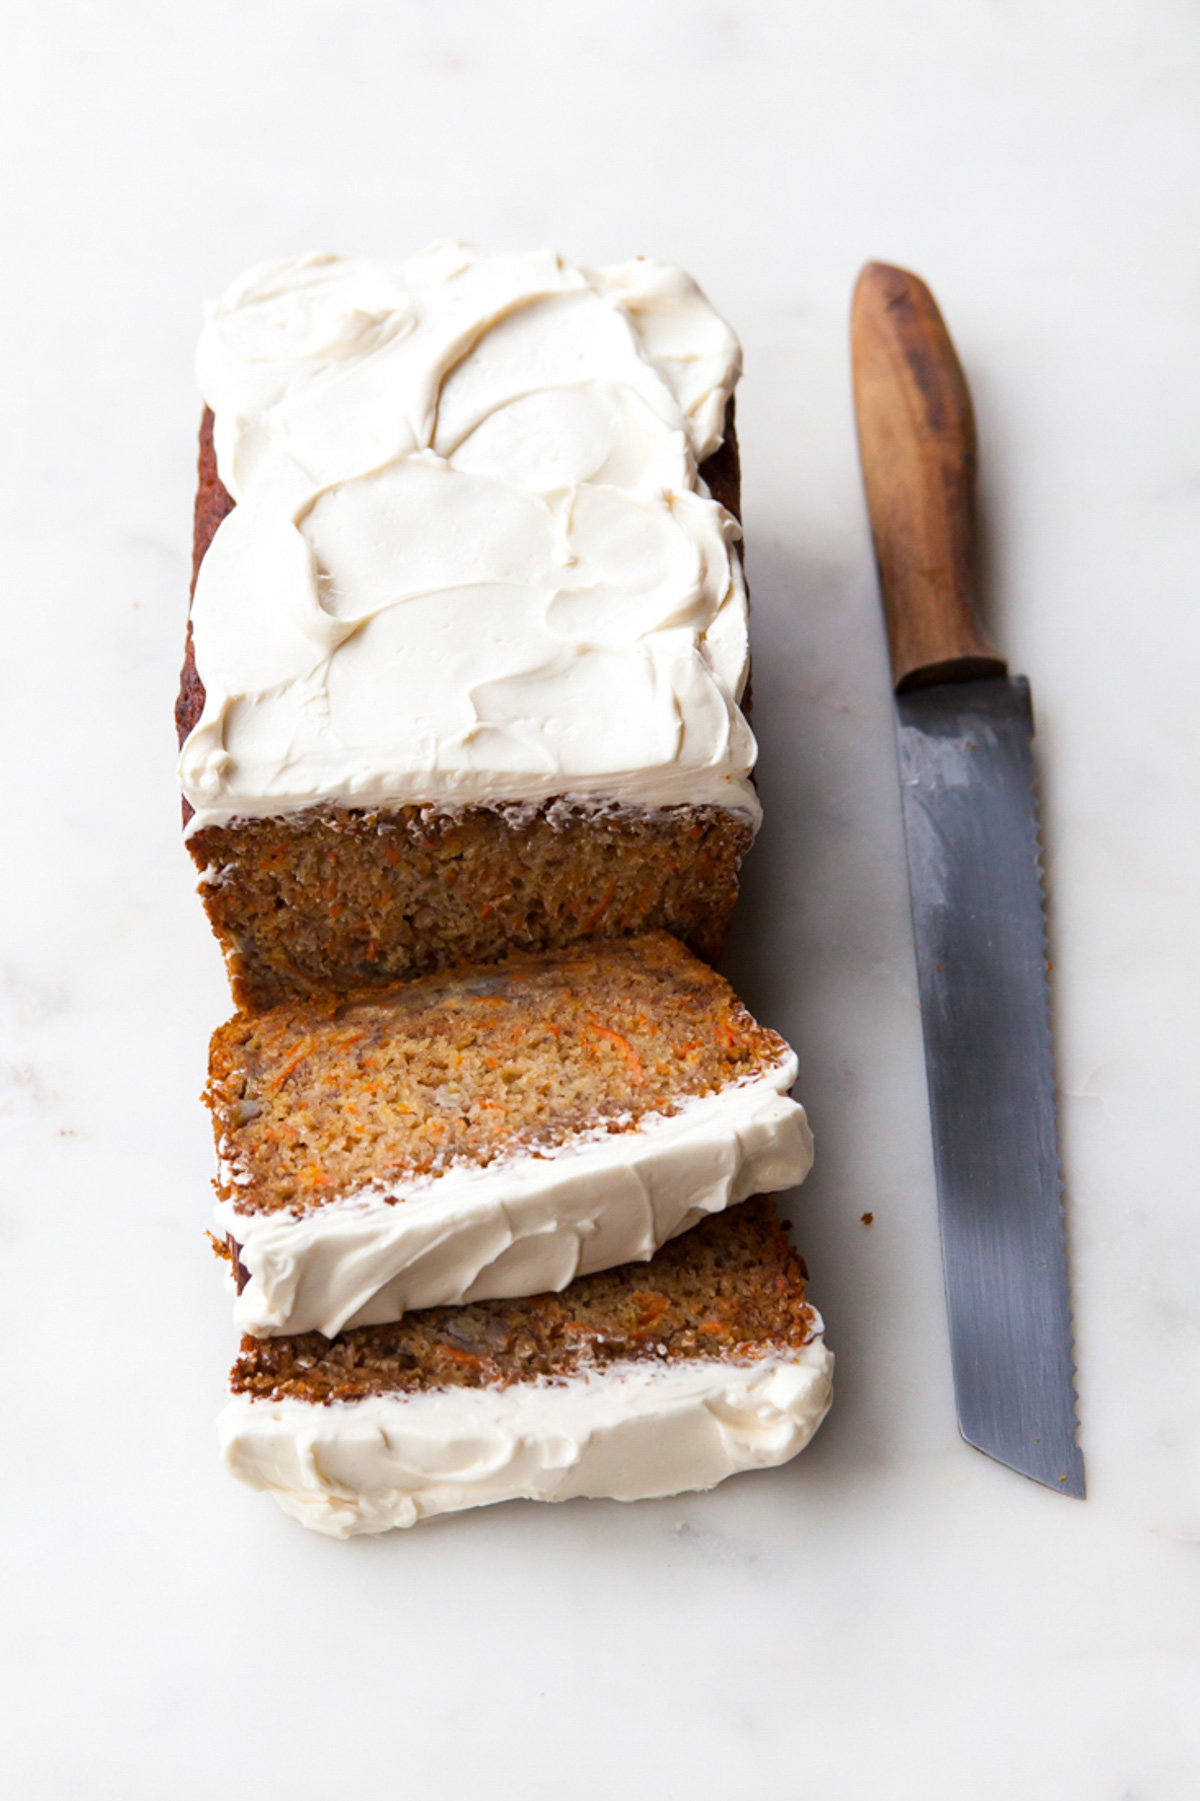 A load of carrot banana bread with cream cheese frosting on top that's been sliced